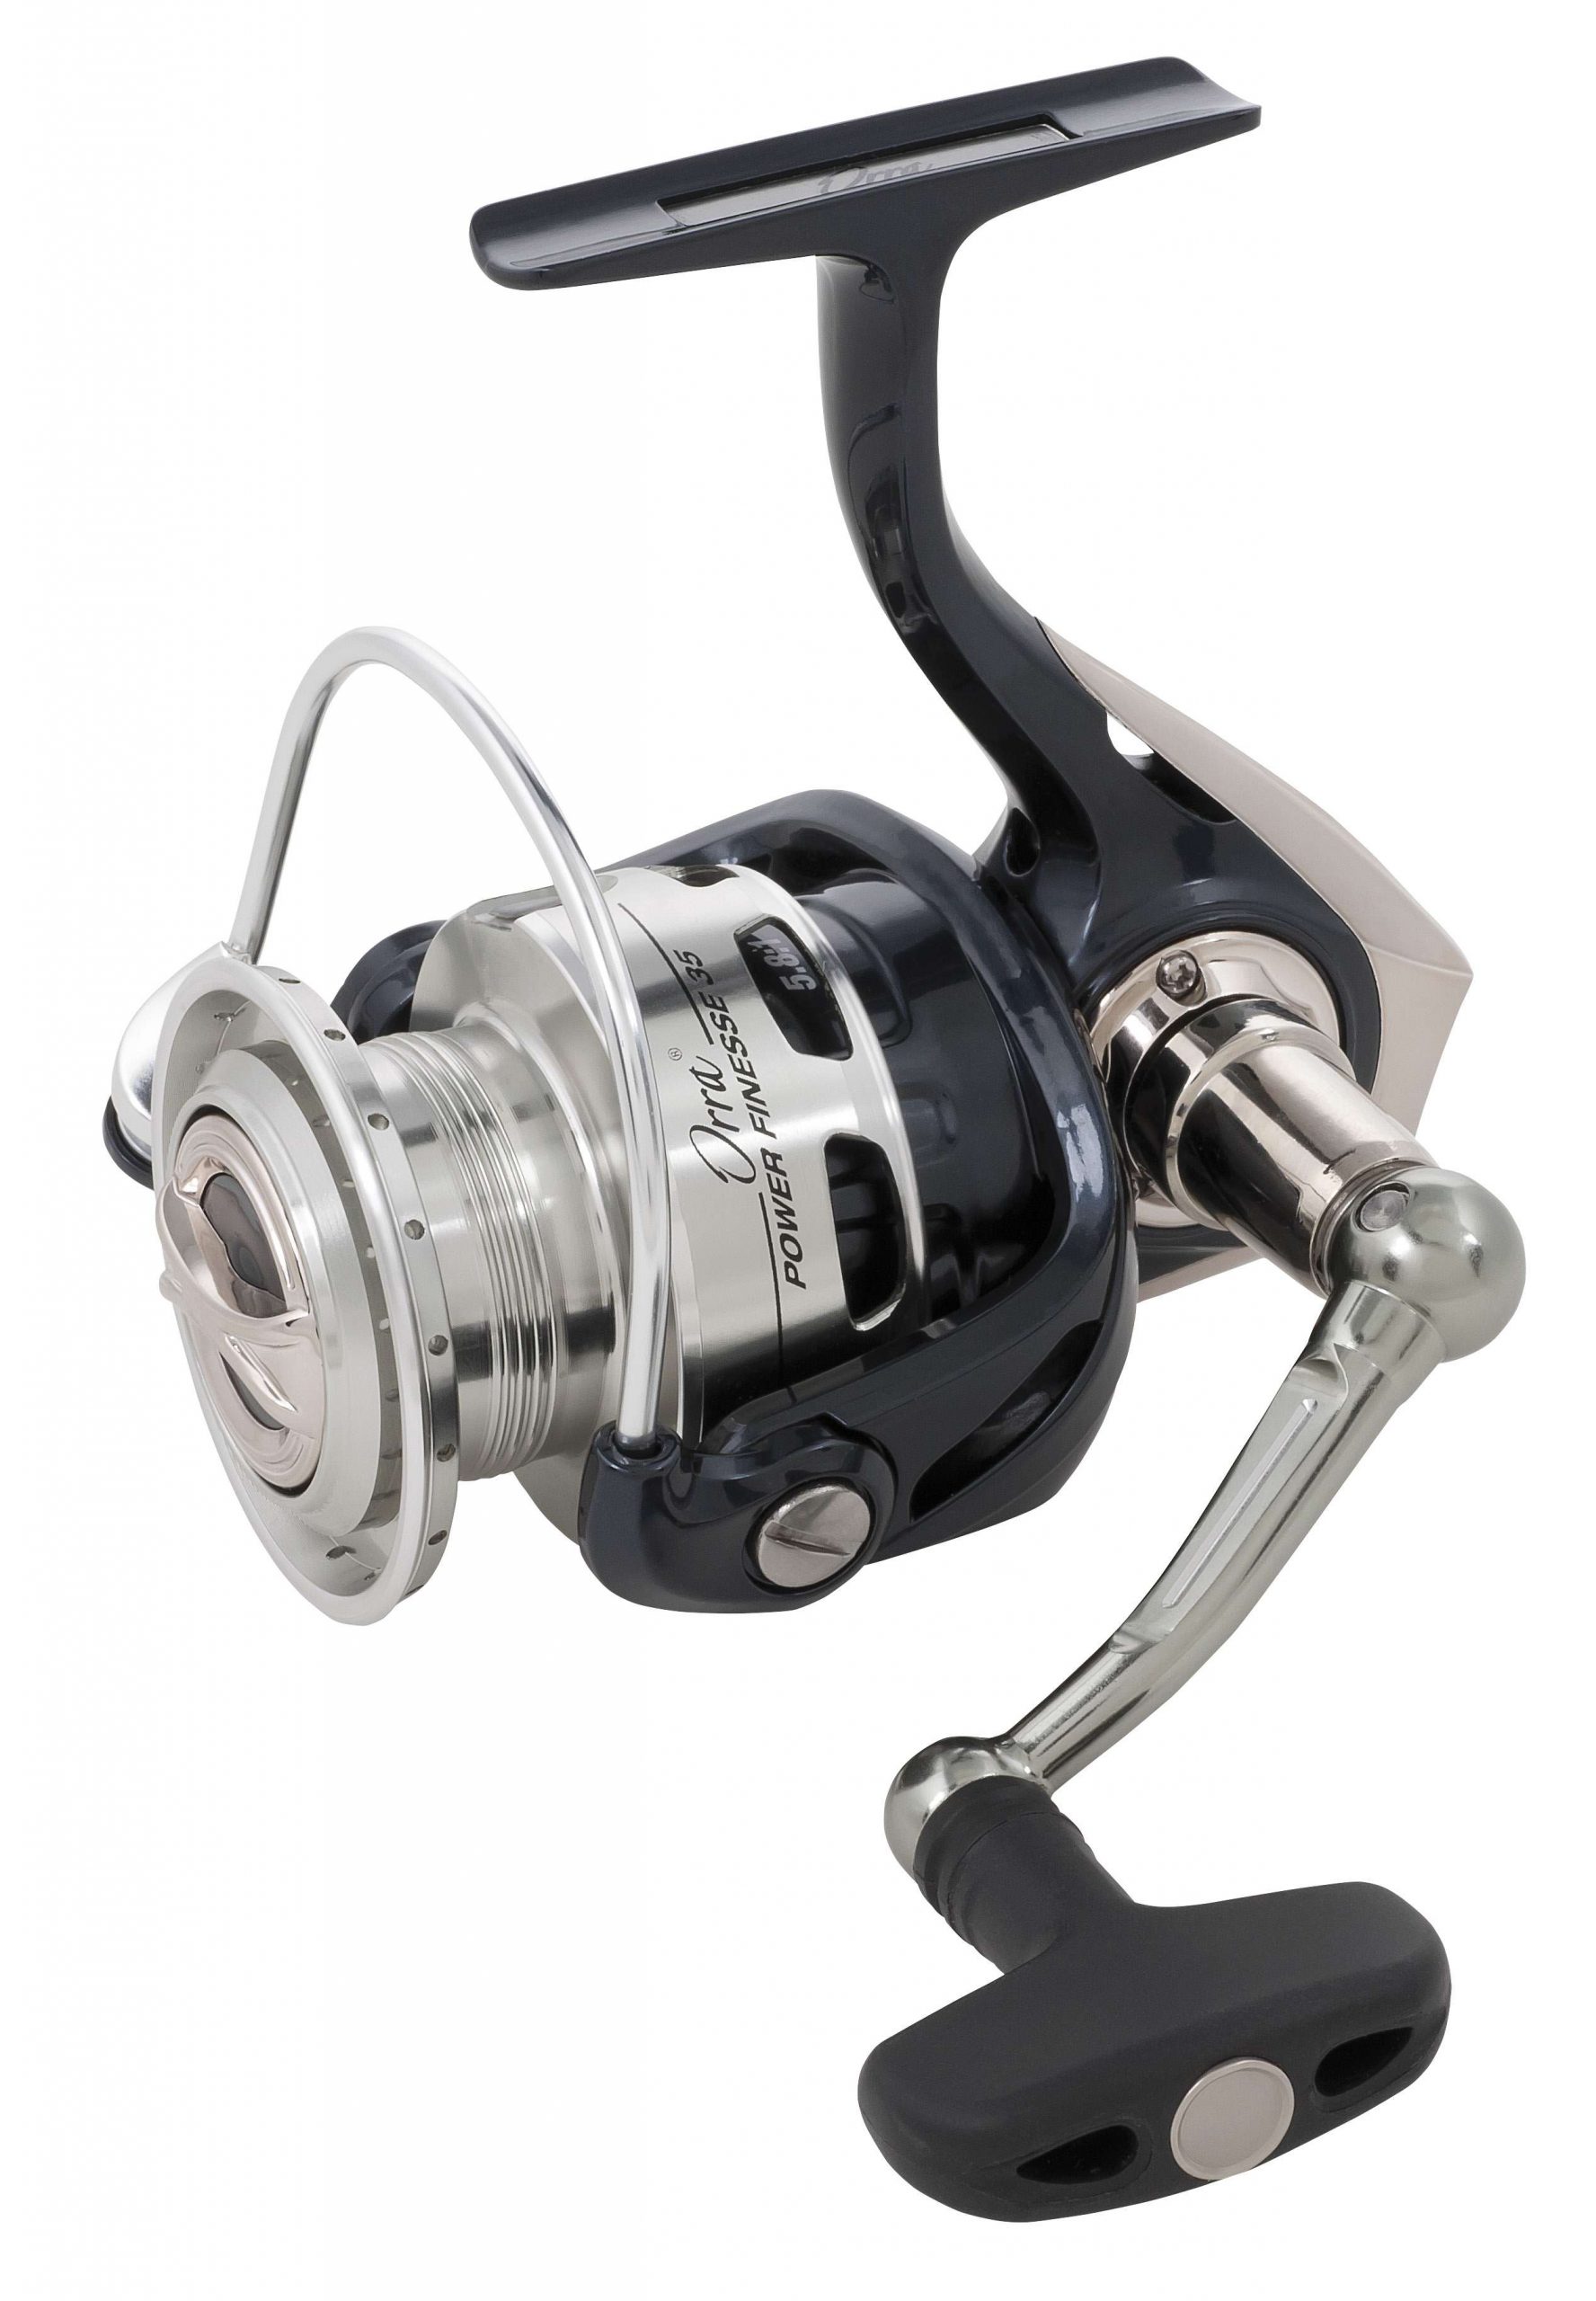 <b>ABU GARCIA ORRA POWER FINESSE</b>
Finesse fishing and fluorocarbon lines go together like peas and carrots, but small spinning reels and the ever-springy fluoro do not. Abu Garcia believes it has fixed this conundrum with the Orra. This new spinning reel has a wider spool than most and the Rocket Line Management system, which incorporates a new spool lip design, improved bail angle and a slow oscillation system. The power comes in a 5.8:1 gear ratio, collecting 36 inches of line per turn. The Orra will retail for $99.95.